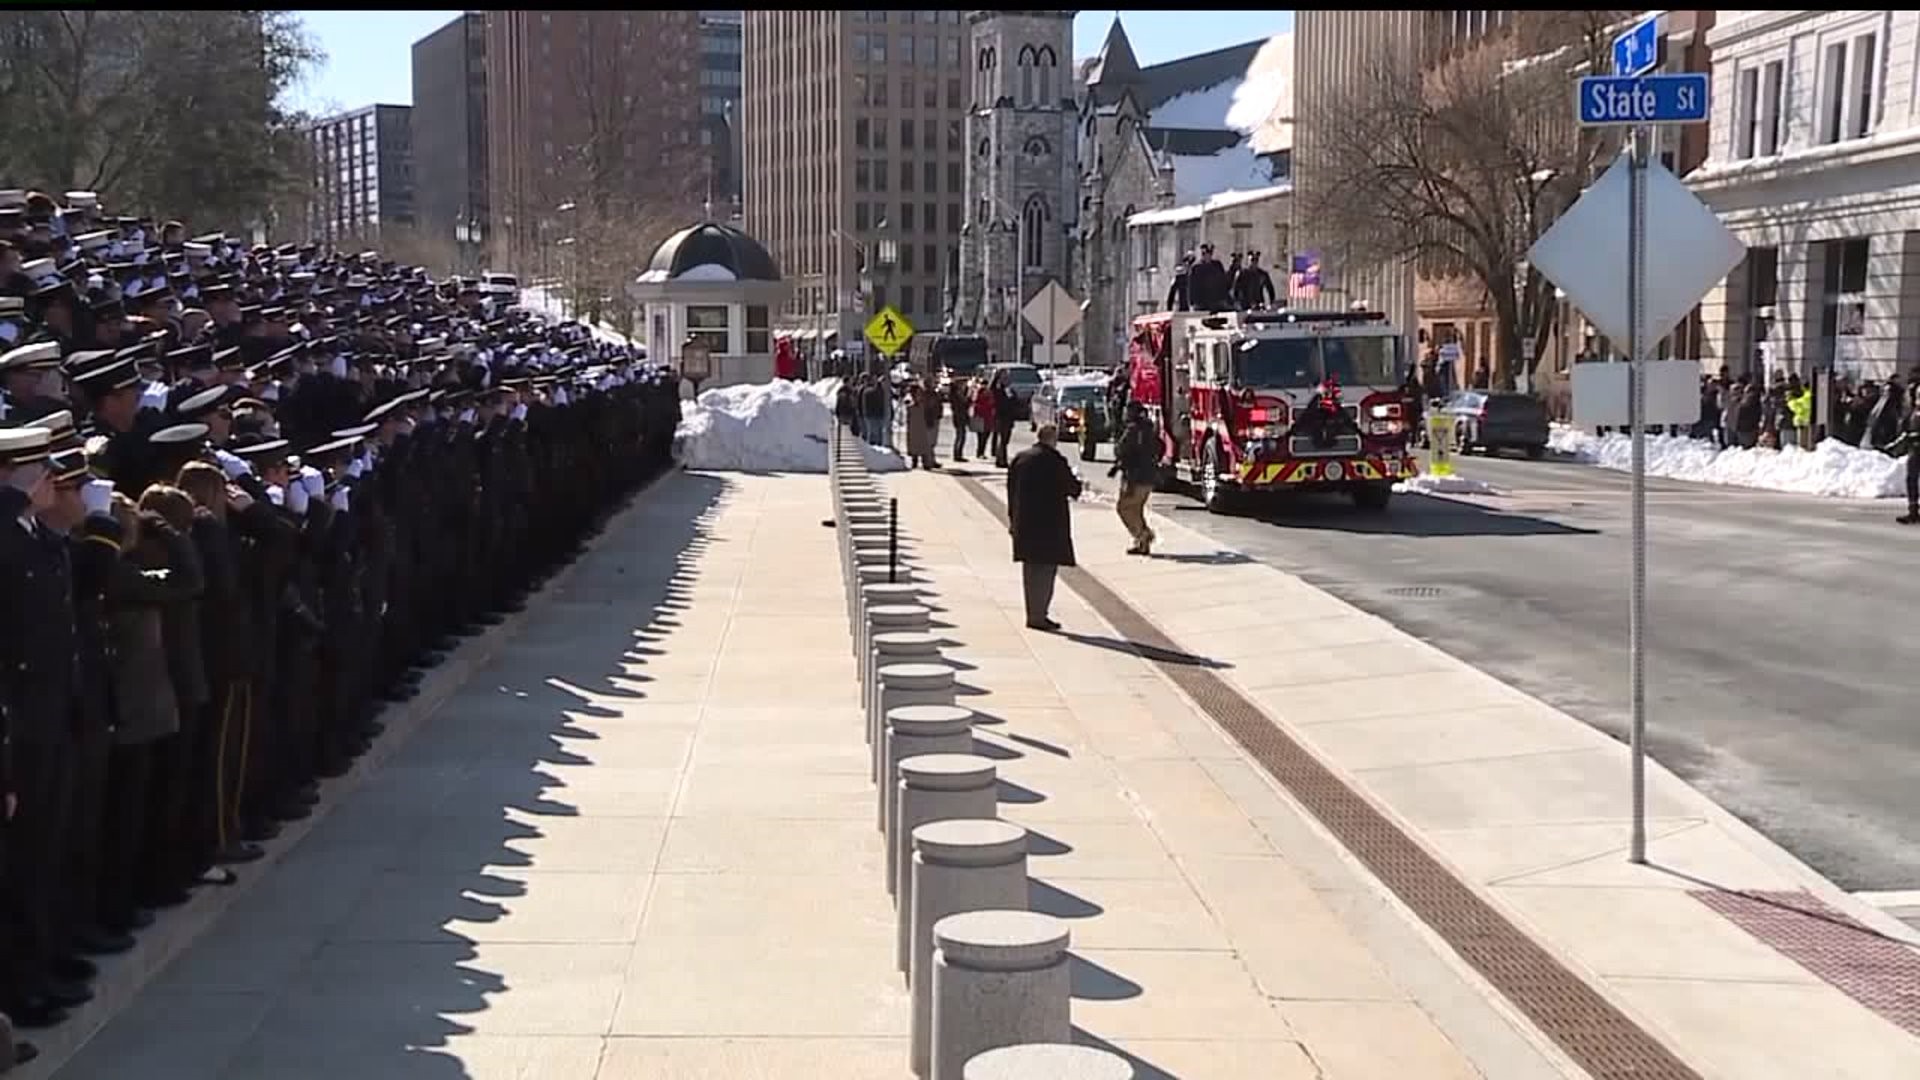 Honoring a fallen fireighter with a procession in Harrisburg